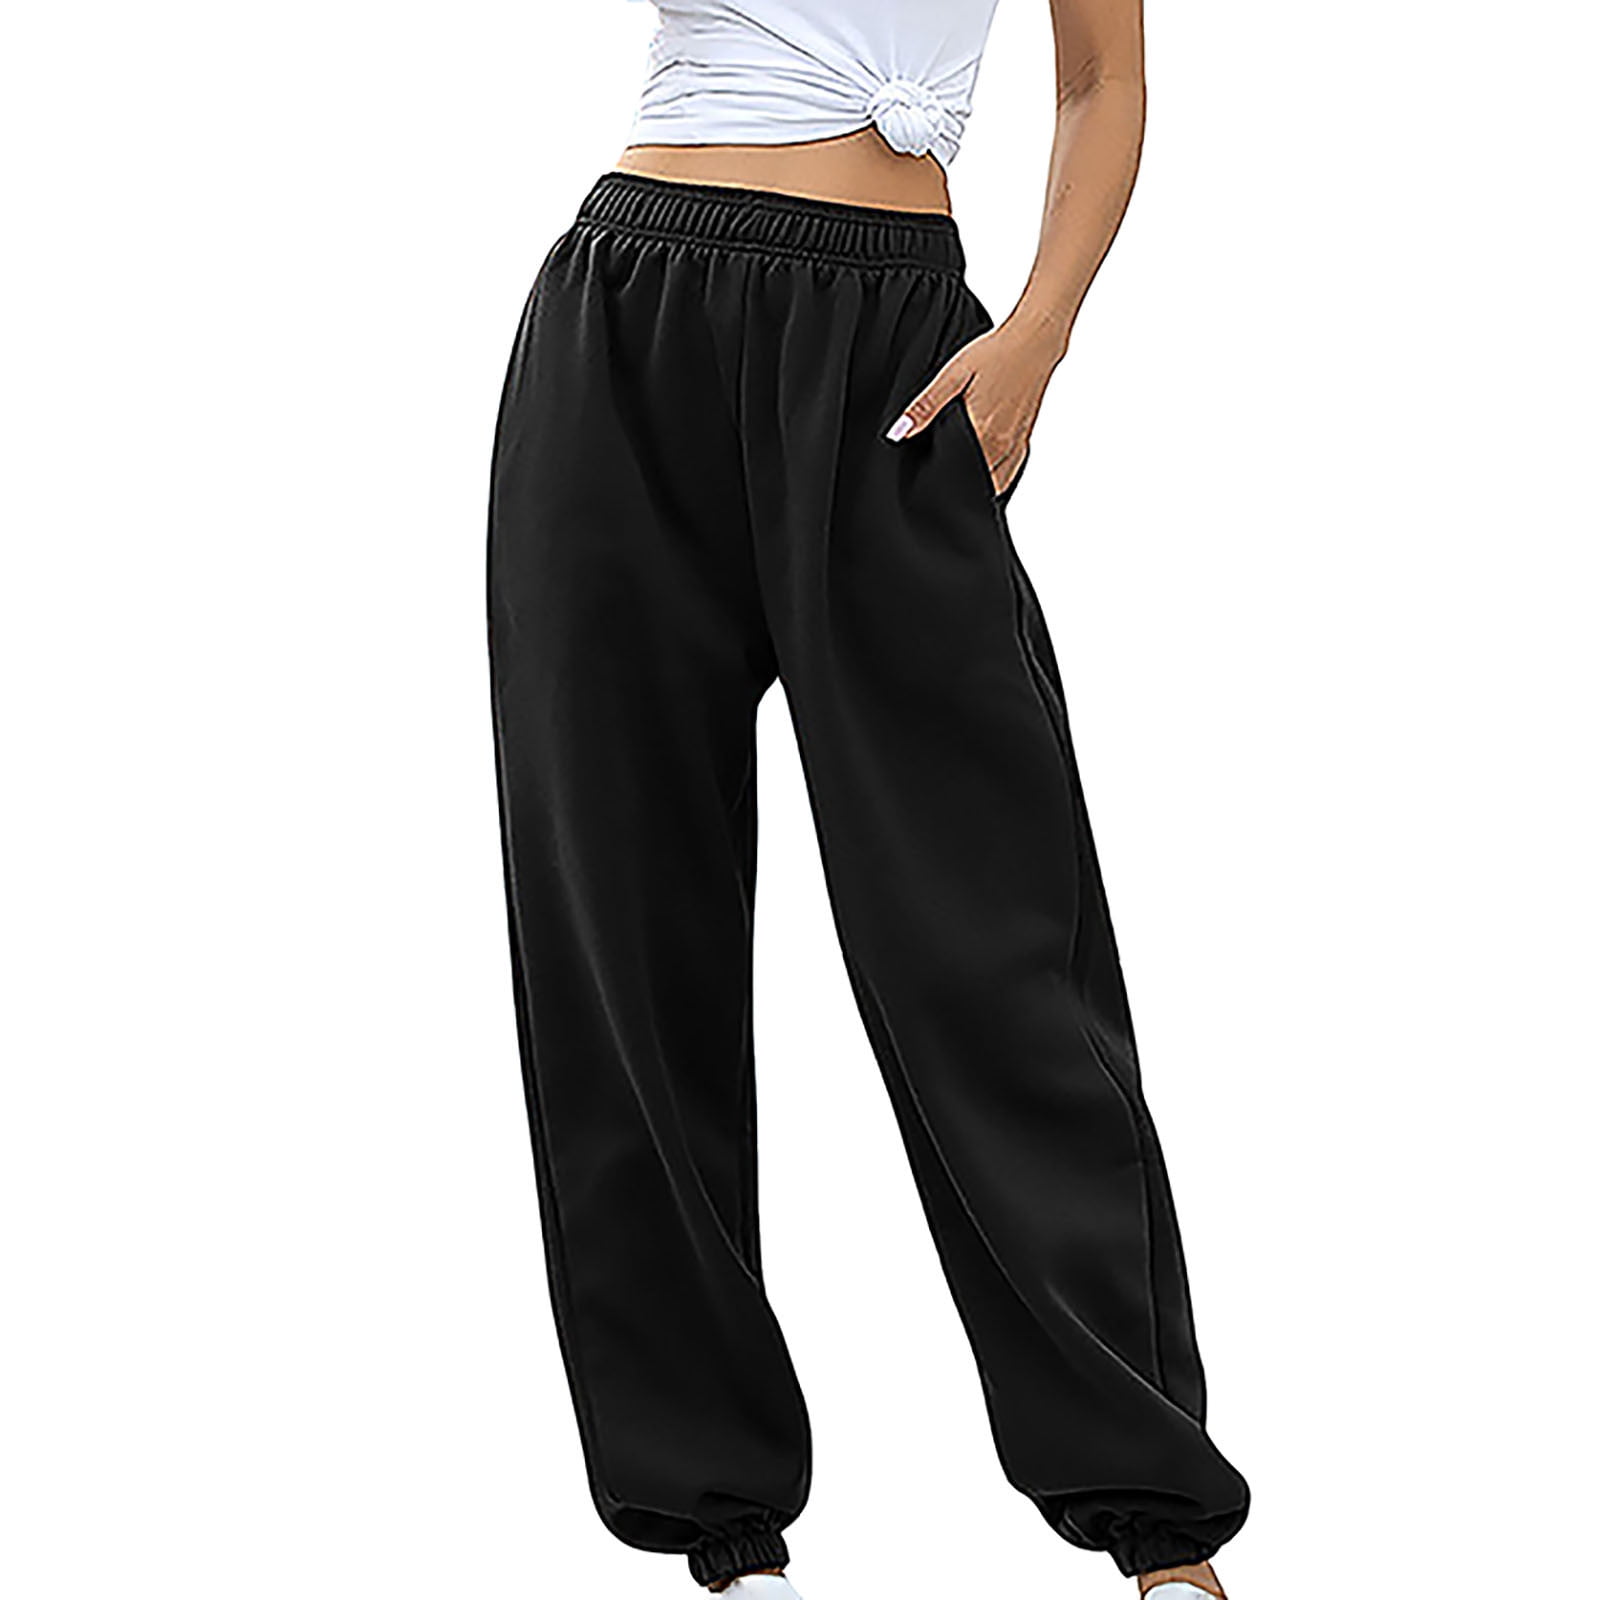  XBTCLXEBCO Womens Wide Leg Sweatpants Elastic Waist Drawstring  Athletic Joggers Side Slit Baggy Lounge Sweat Pants Fall Trousers (#B  Black, S) : Clothing, Shoes & Jewelry